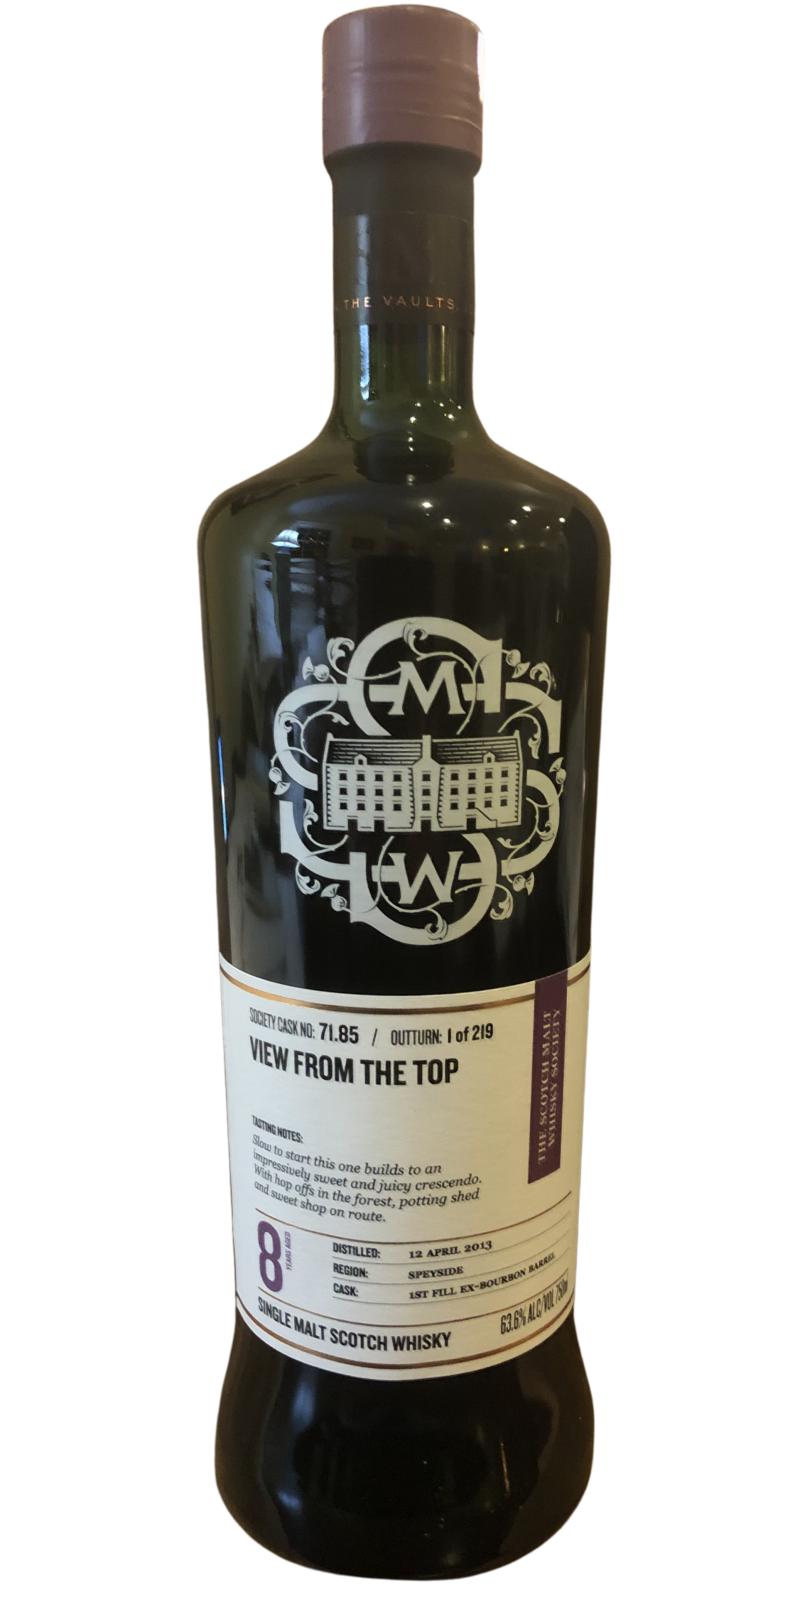 Glenburgie 2013 SMWS 71.85 View from the top 1st fill ex-bourbon barrel 63.6% 750ml